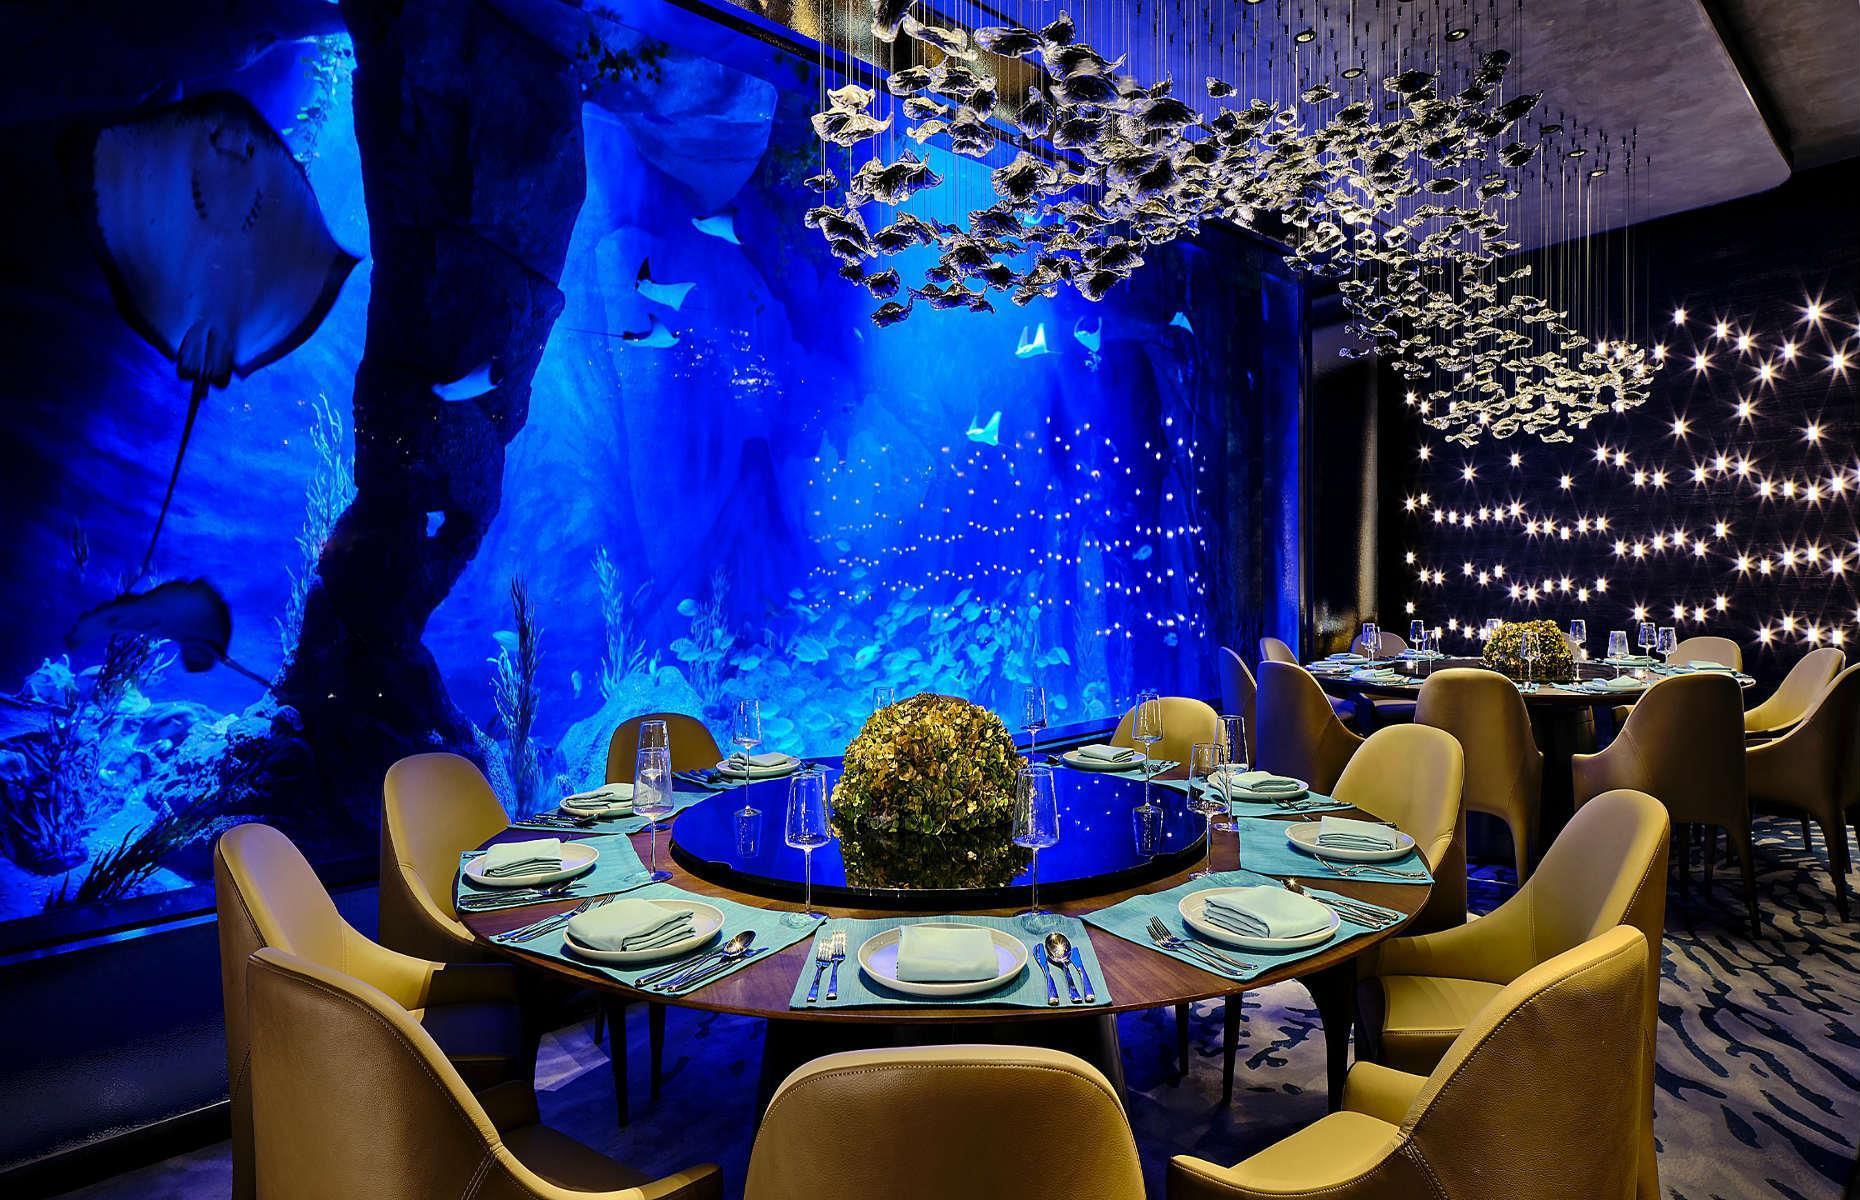 But it’s not just the underwater suite guests who get to ogle the aquarium's mesmerising tropical marine life up close. The hotel has a tranquil underwater restaurant, Mr Fisher, where guests can immerse themselves in the wonders of the ocean. Diners sit next to full-length glass windows that look out onto the pretty corals and swirling fish as they feast on (yep, you guessed it) top-quality seafood.